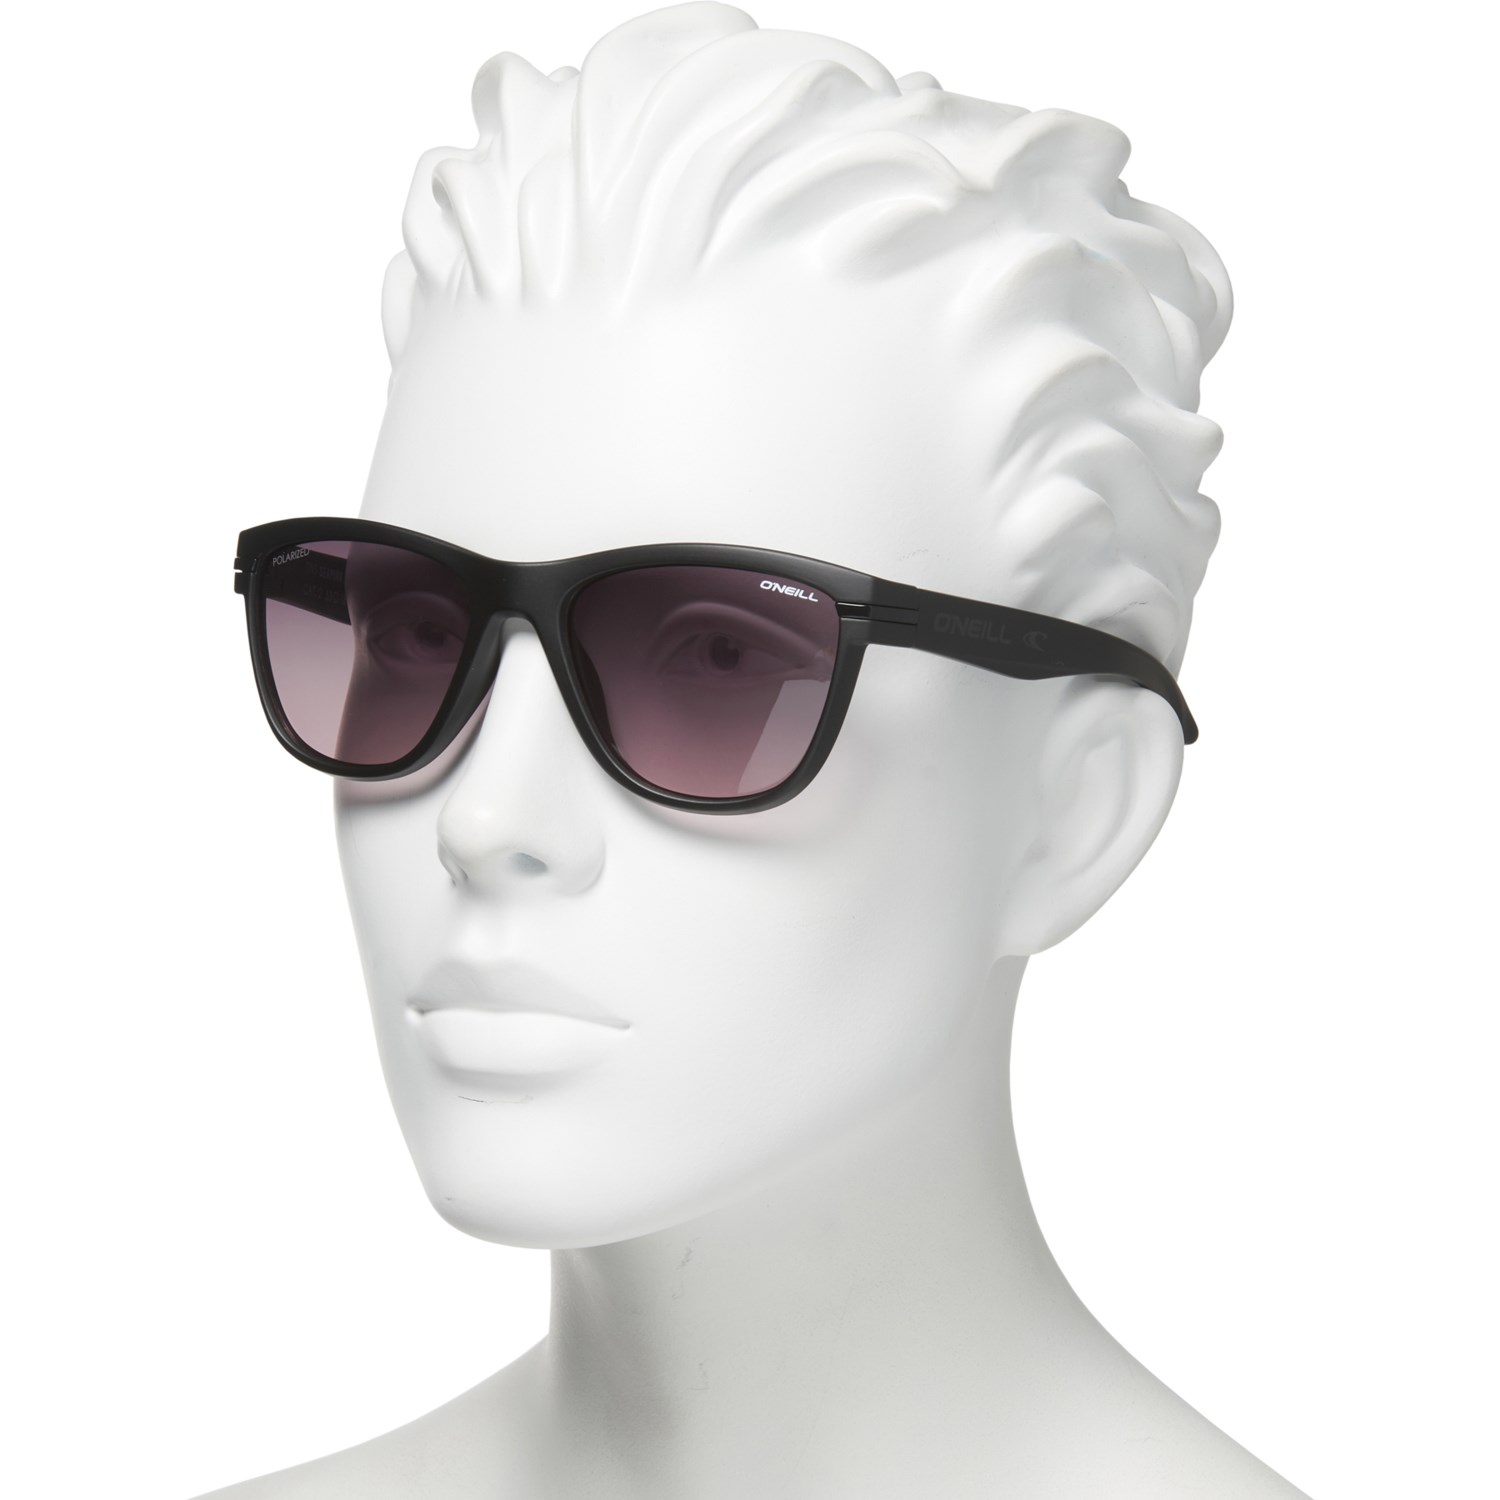 O'Neill Seapink Sunglasses (For Women) - Save 66%